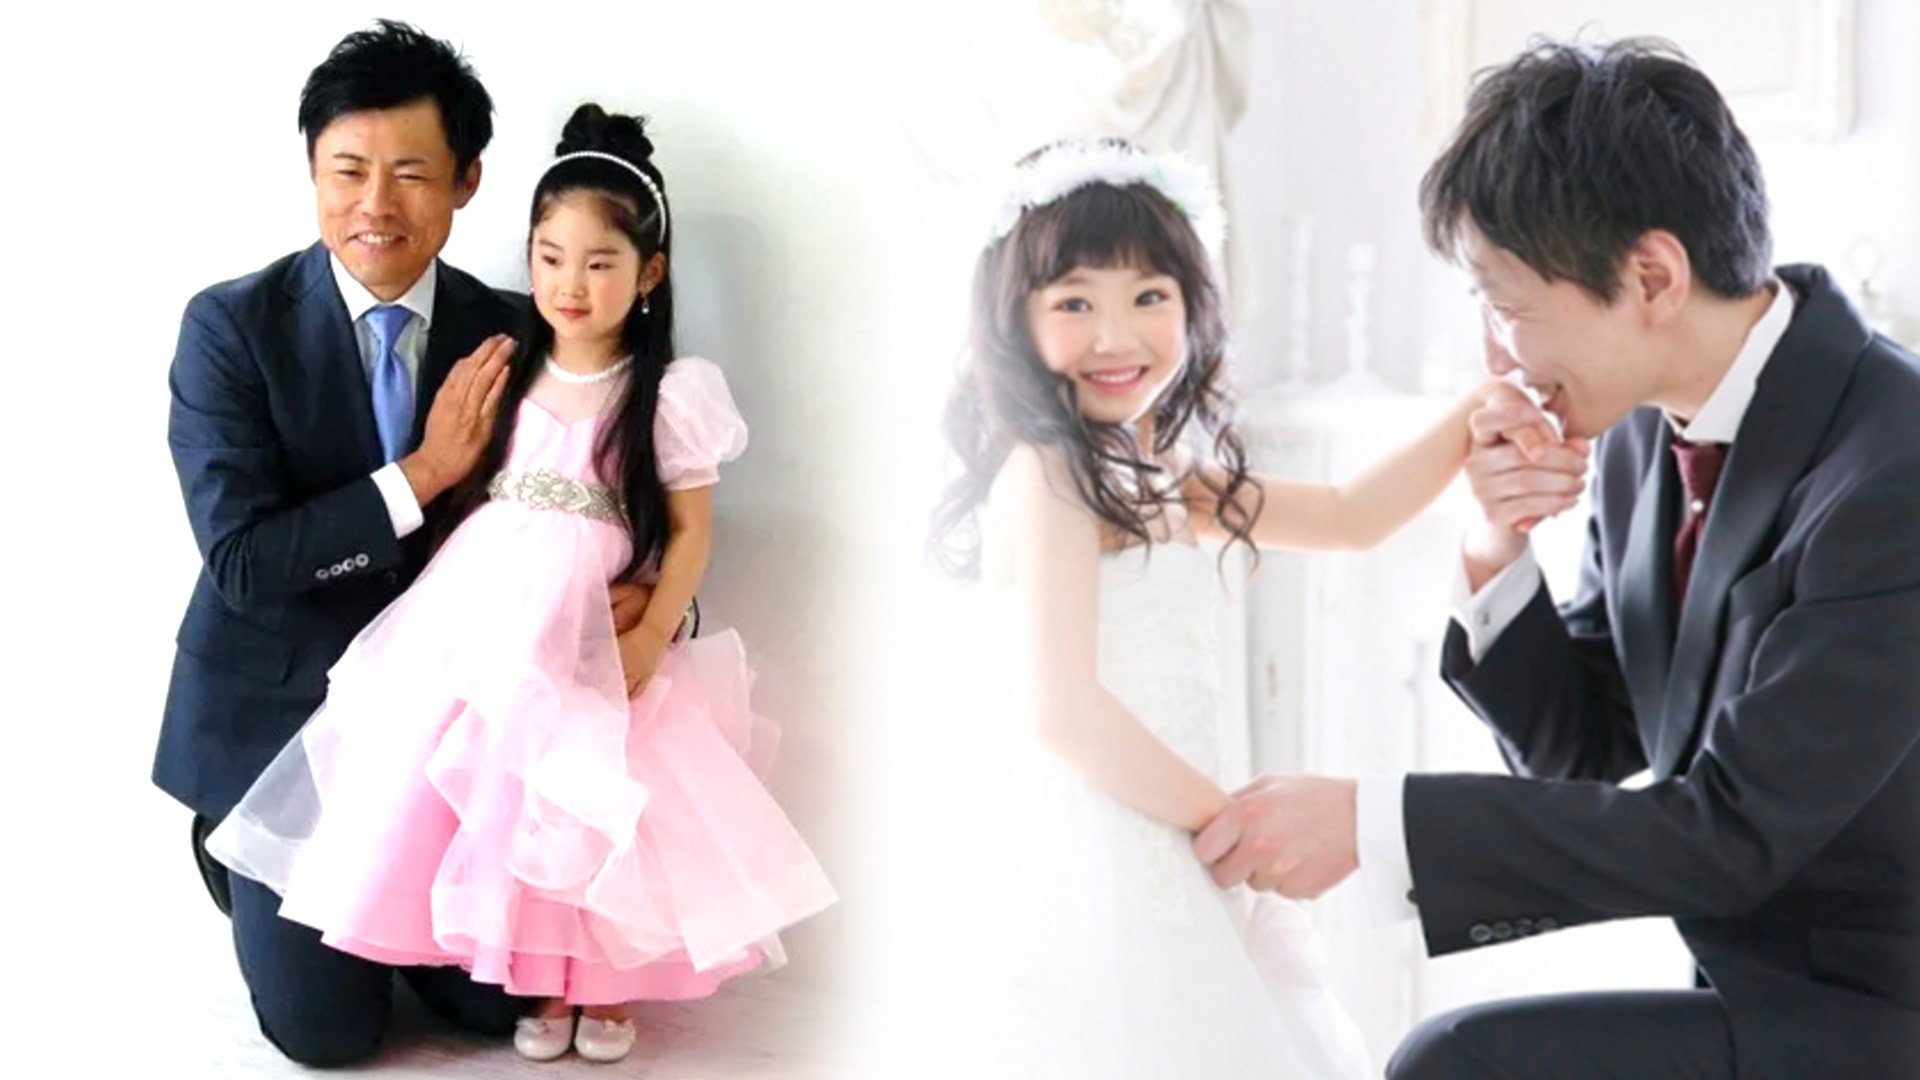 A photo studio in Japan has found itself in hot water for encouraging young girls to dress up in wedding dresses and pose as “daddy’s little bride”. Photo: SCMP composite/happilyphoto.jp